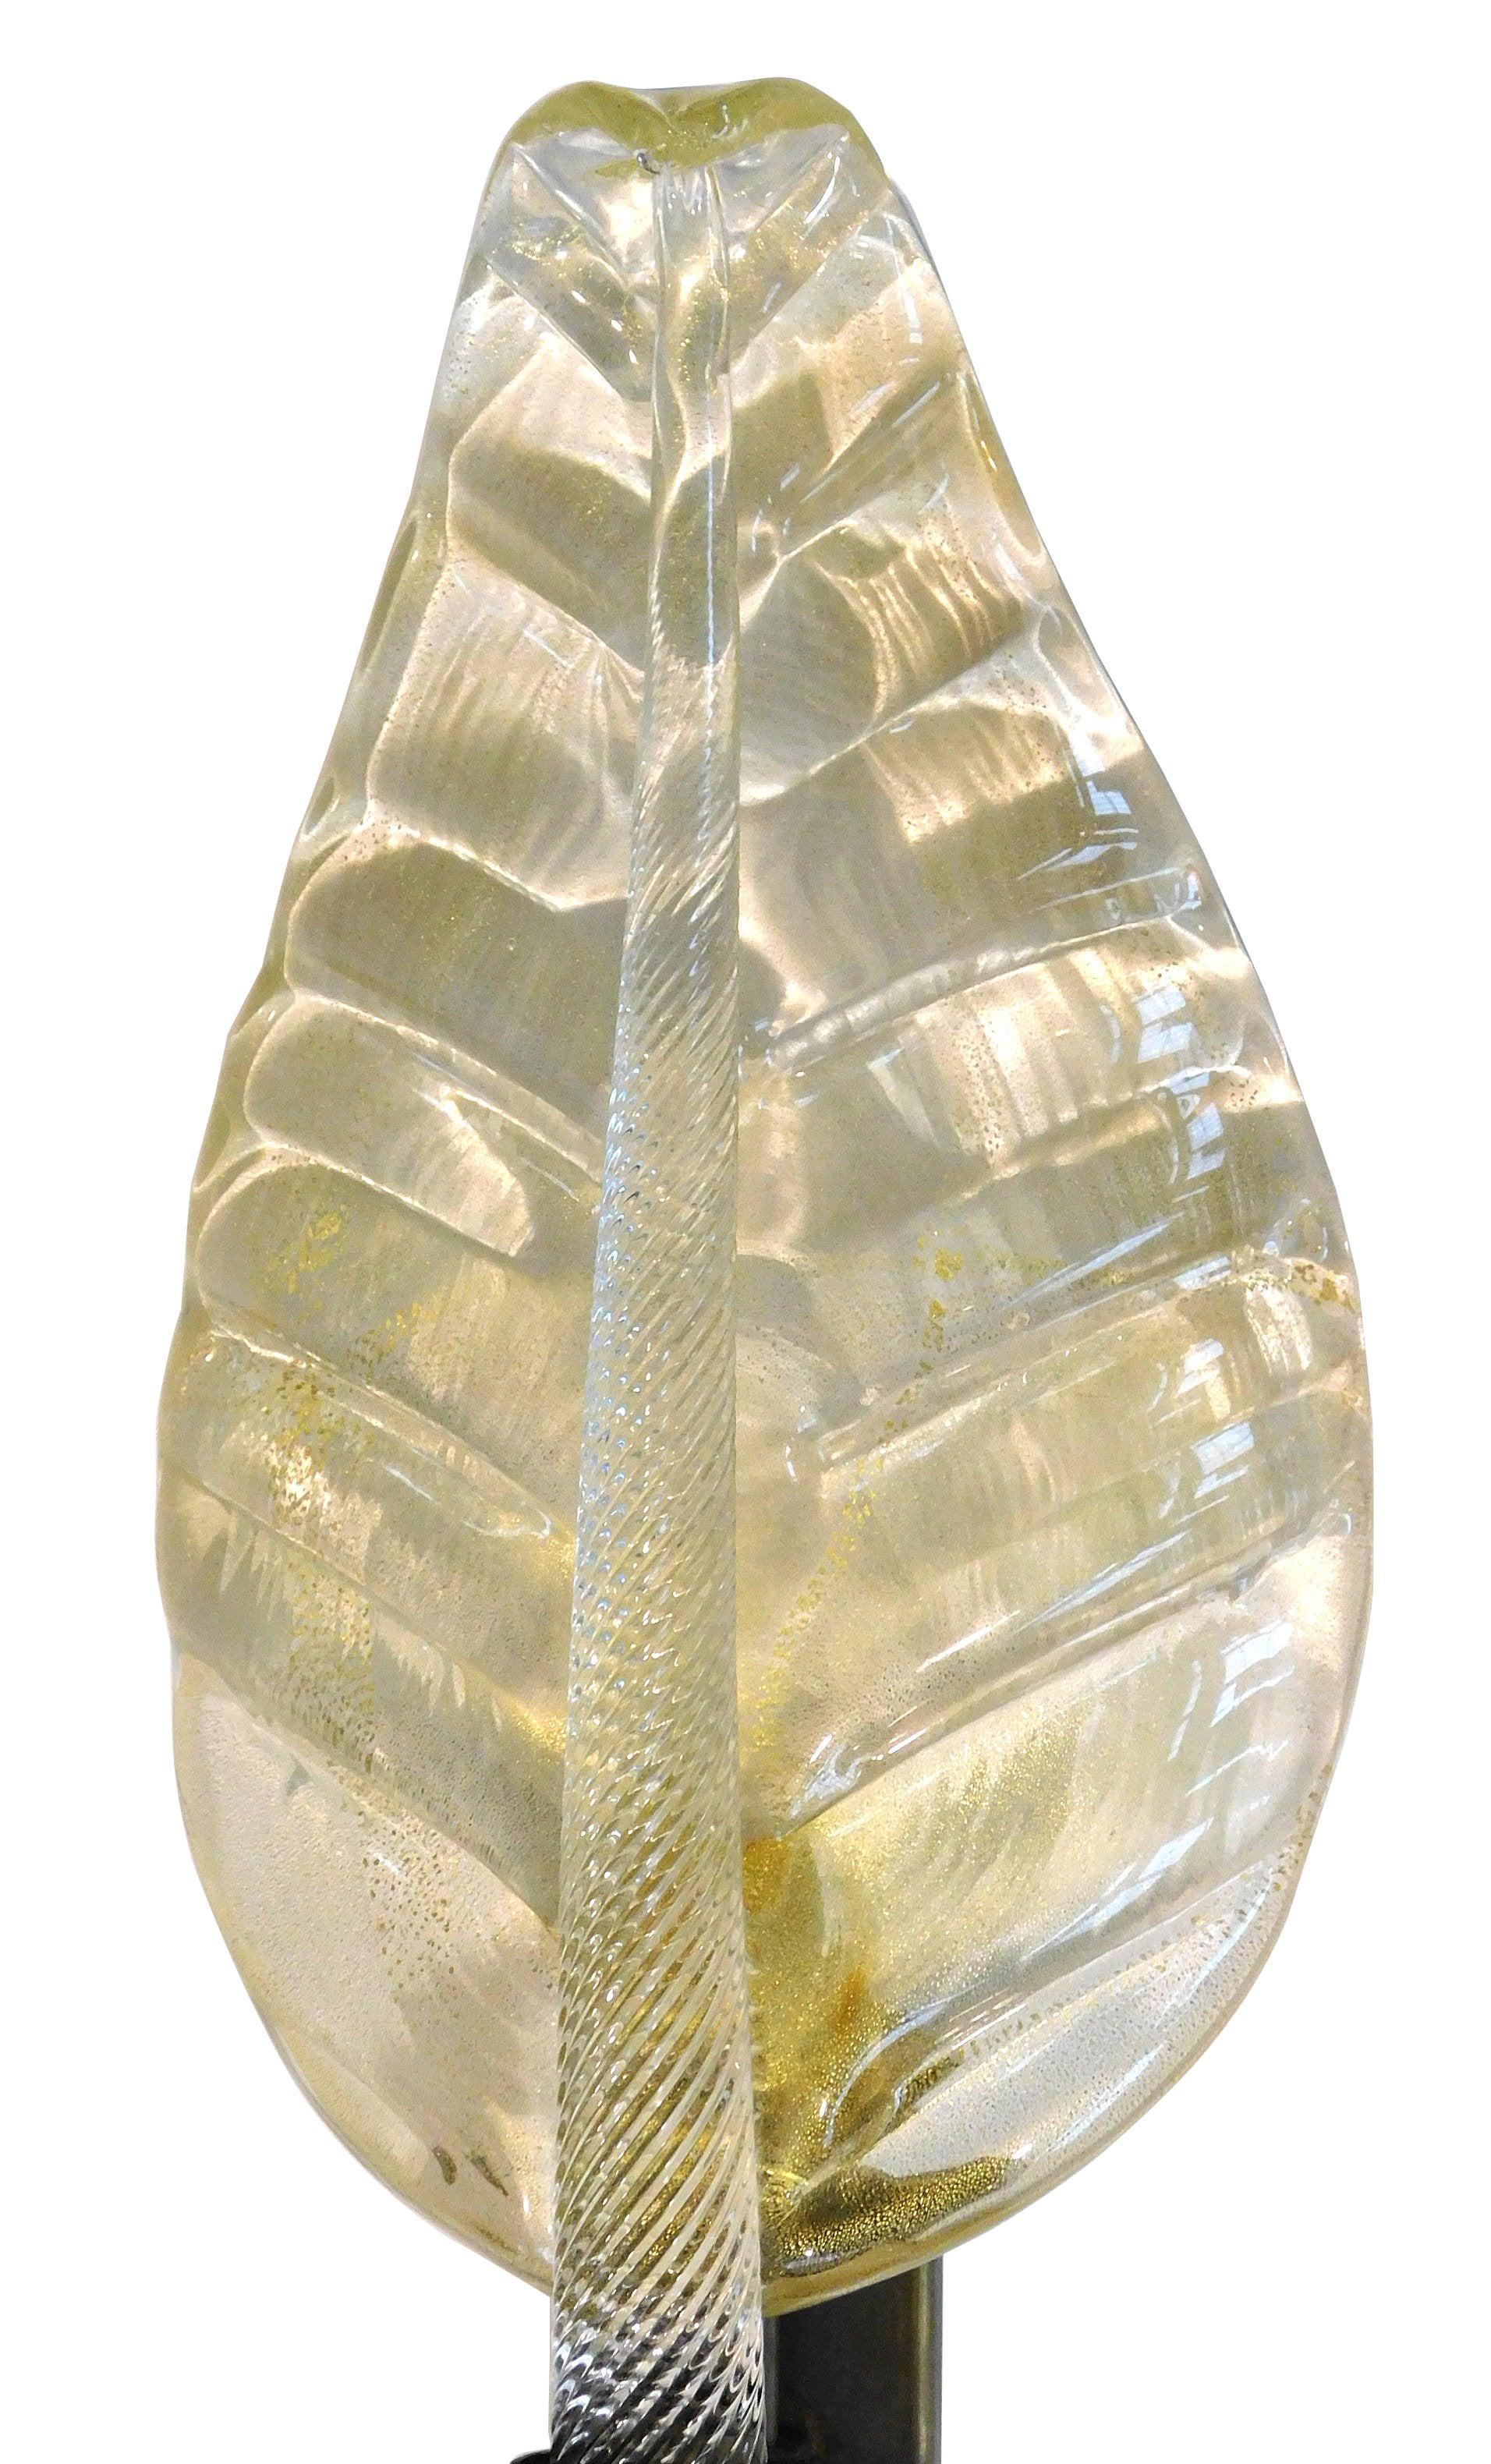 Italian leaf shaped wall light shown in hand blown Murano glass infused with 24-karat gold flecks mounted on bronze frame designed by Fabio Bergomi for Fabio Ltd / Made in Italy
1 light / E14 or E12 type / max 40W each
Measures: Height 20 inches /